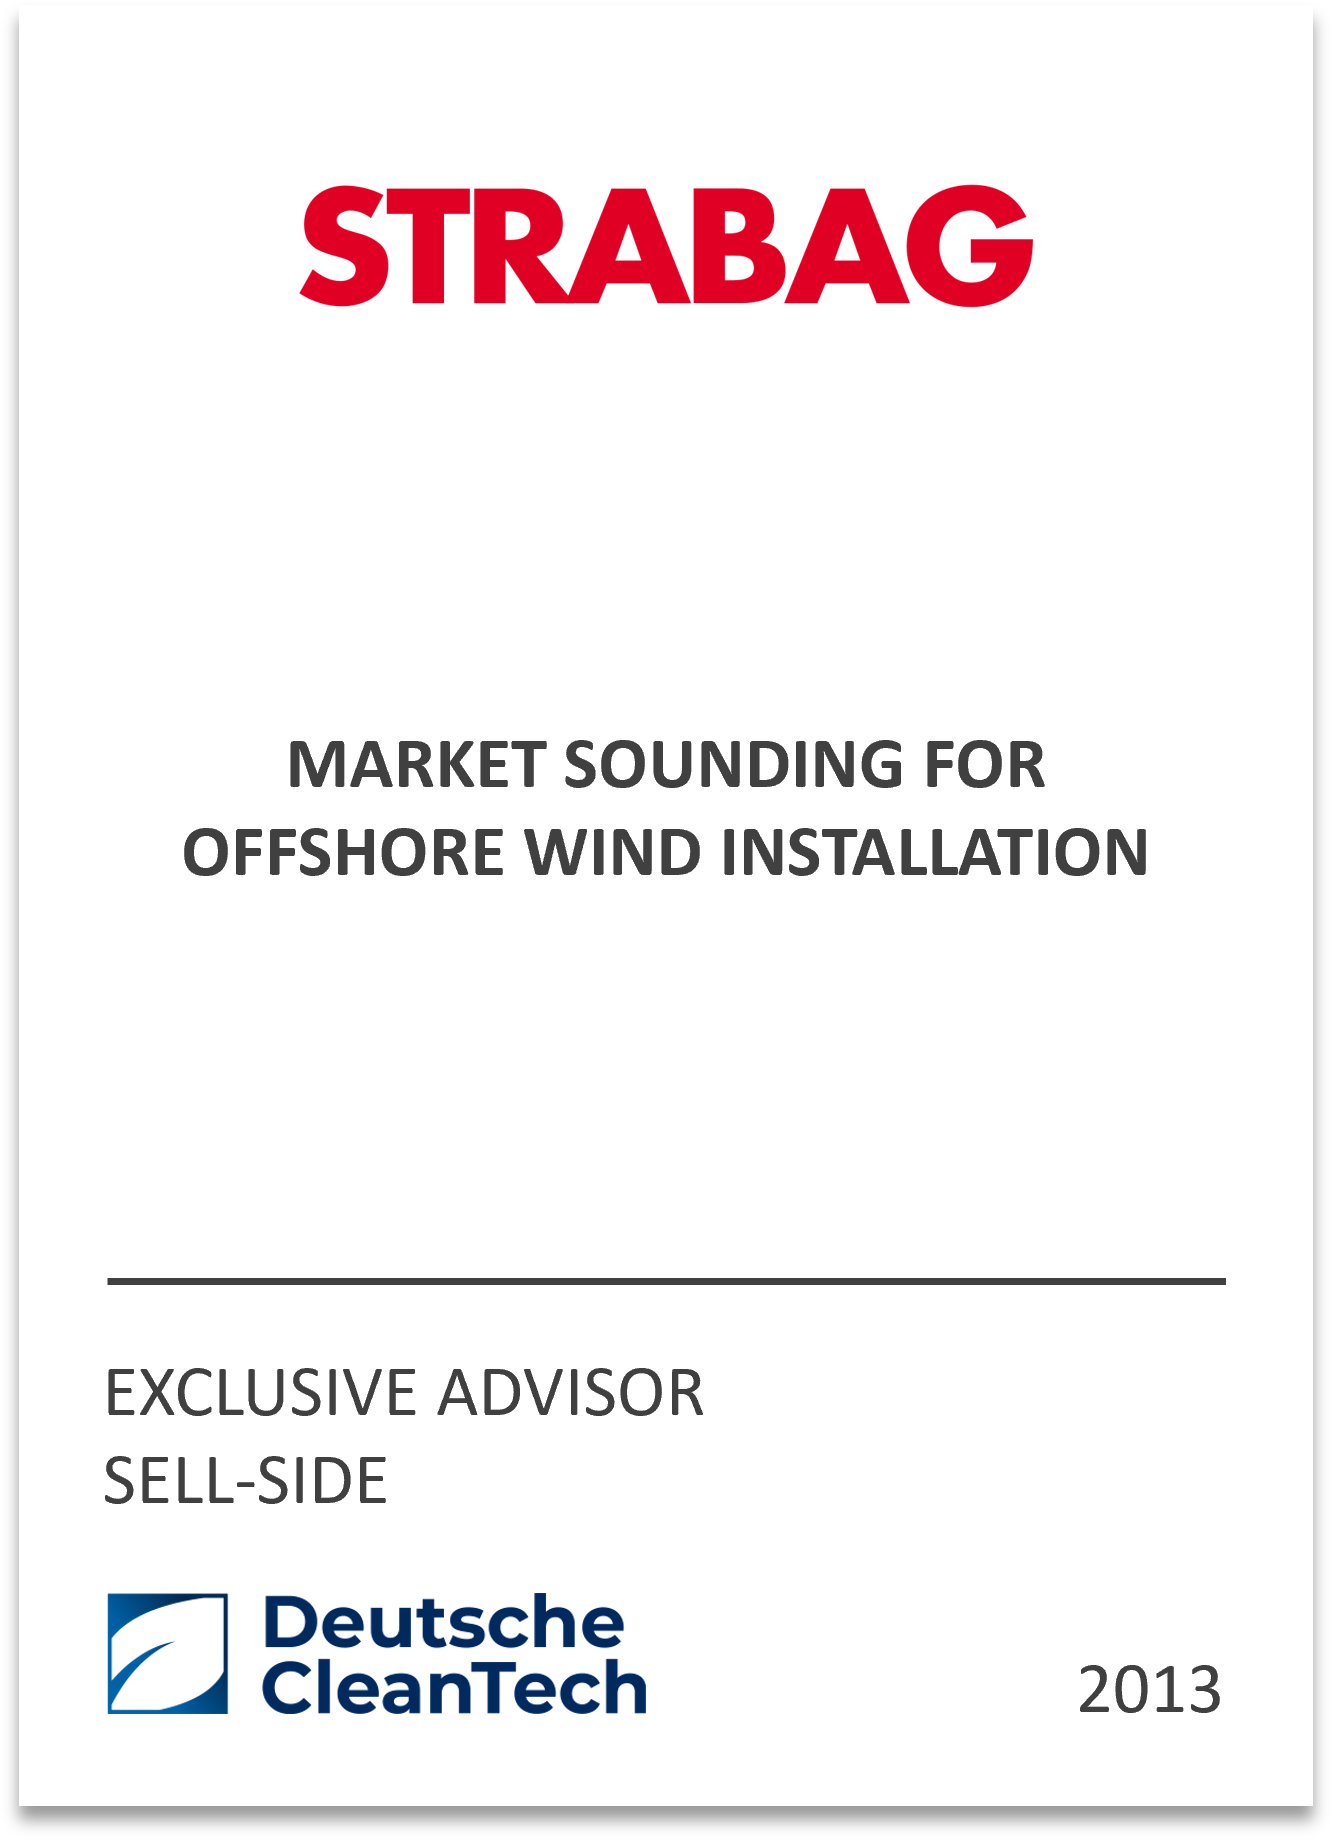 D.CT has been appointed to carry out a qualitative assessment regarding the attractiveness of STRABAG Offshore Wind for a potential sale.